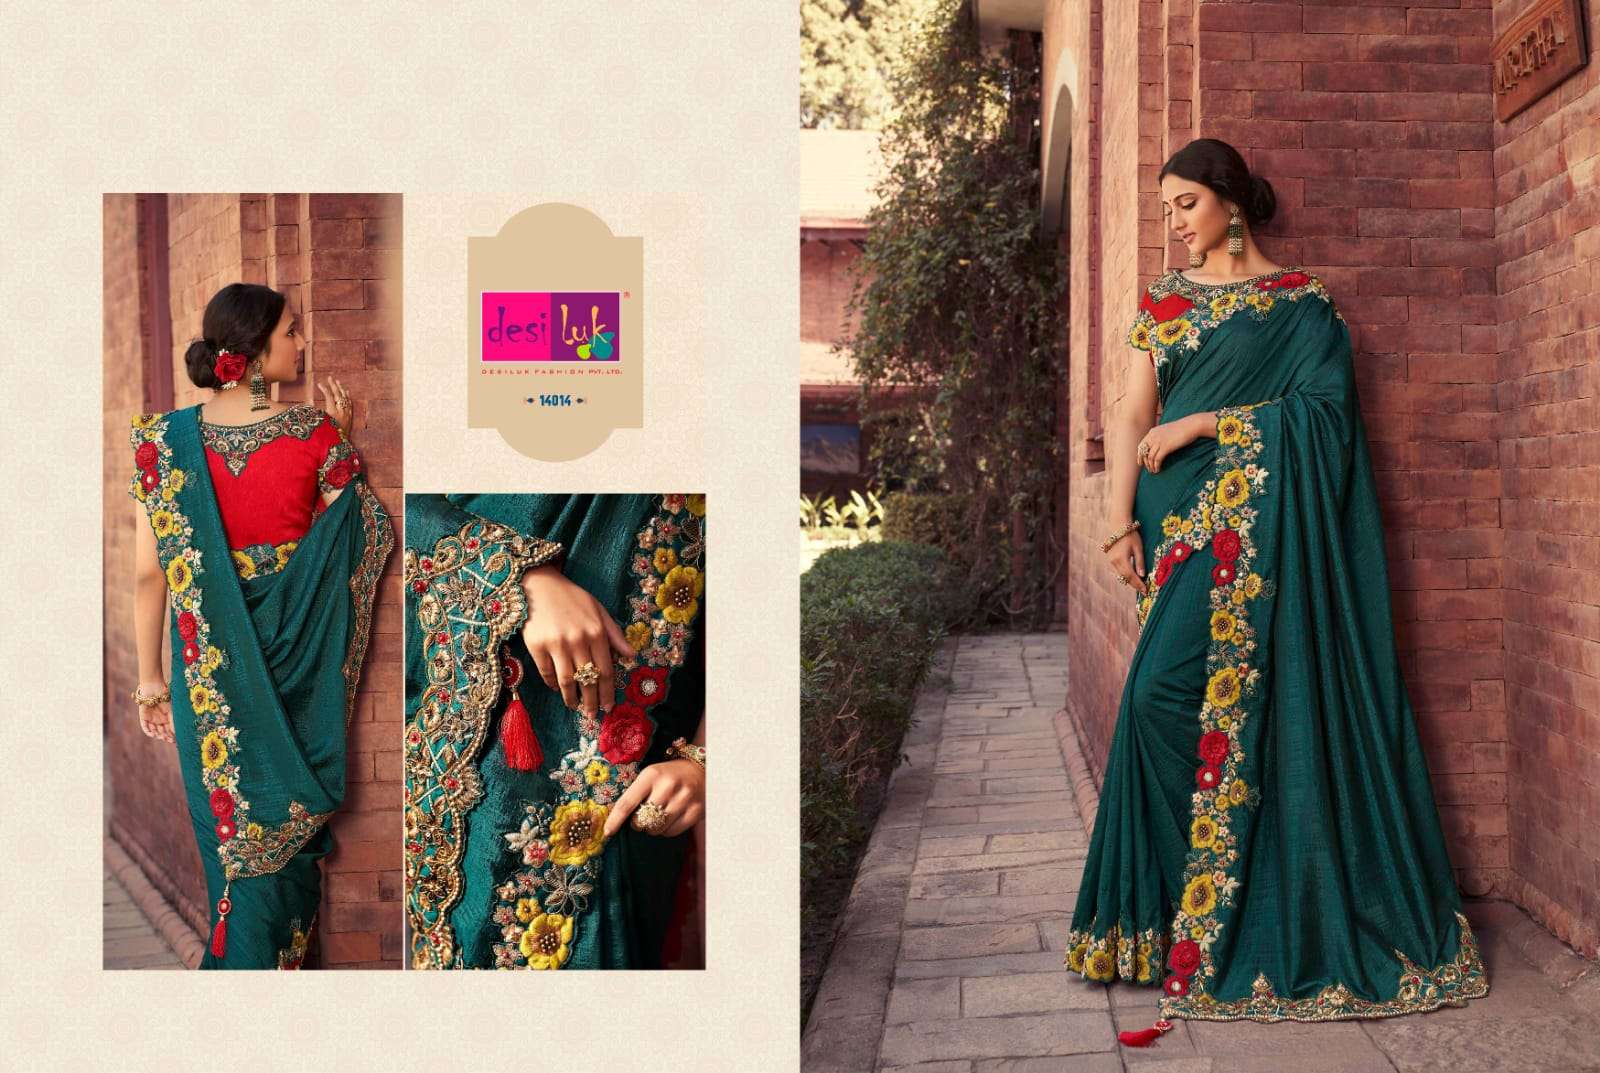 DESI LUK VOL-45 BY DESI LUK 10004 TO 10014 SERIES INDIAN TRADITIONAL WEAR COLLECTION BEAUTIFUL STYLISH FANCY COLORFUL PARTY WEAR & OCCASIONAL WEAR GEORGETTE SAREES AT WHOLESALE PRICE